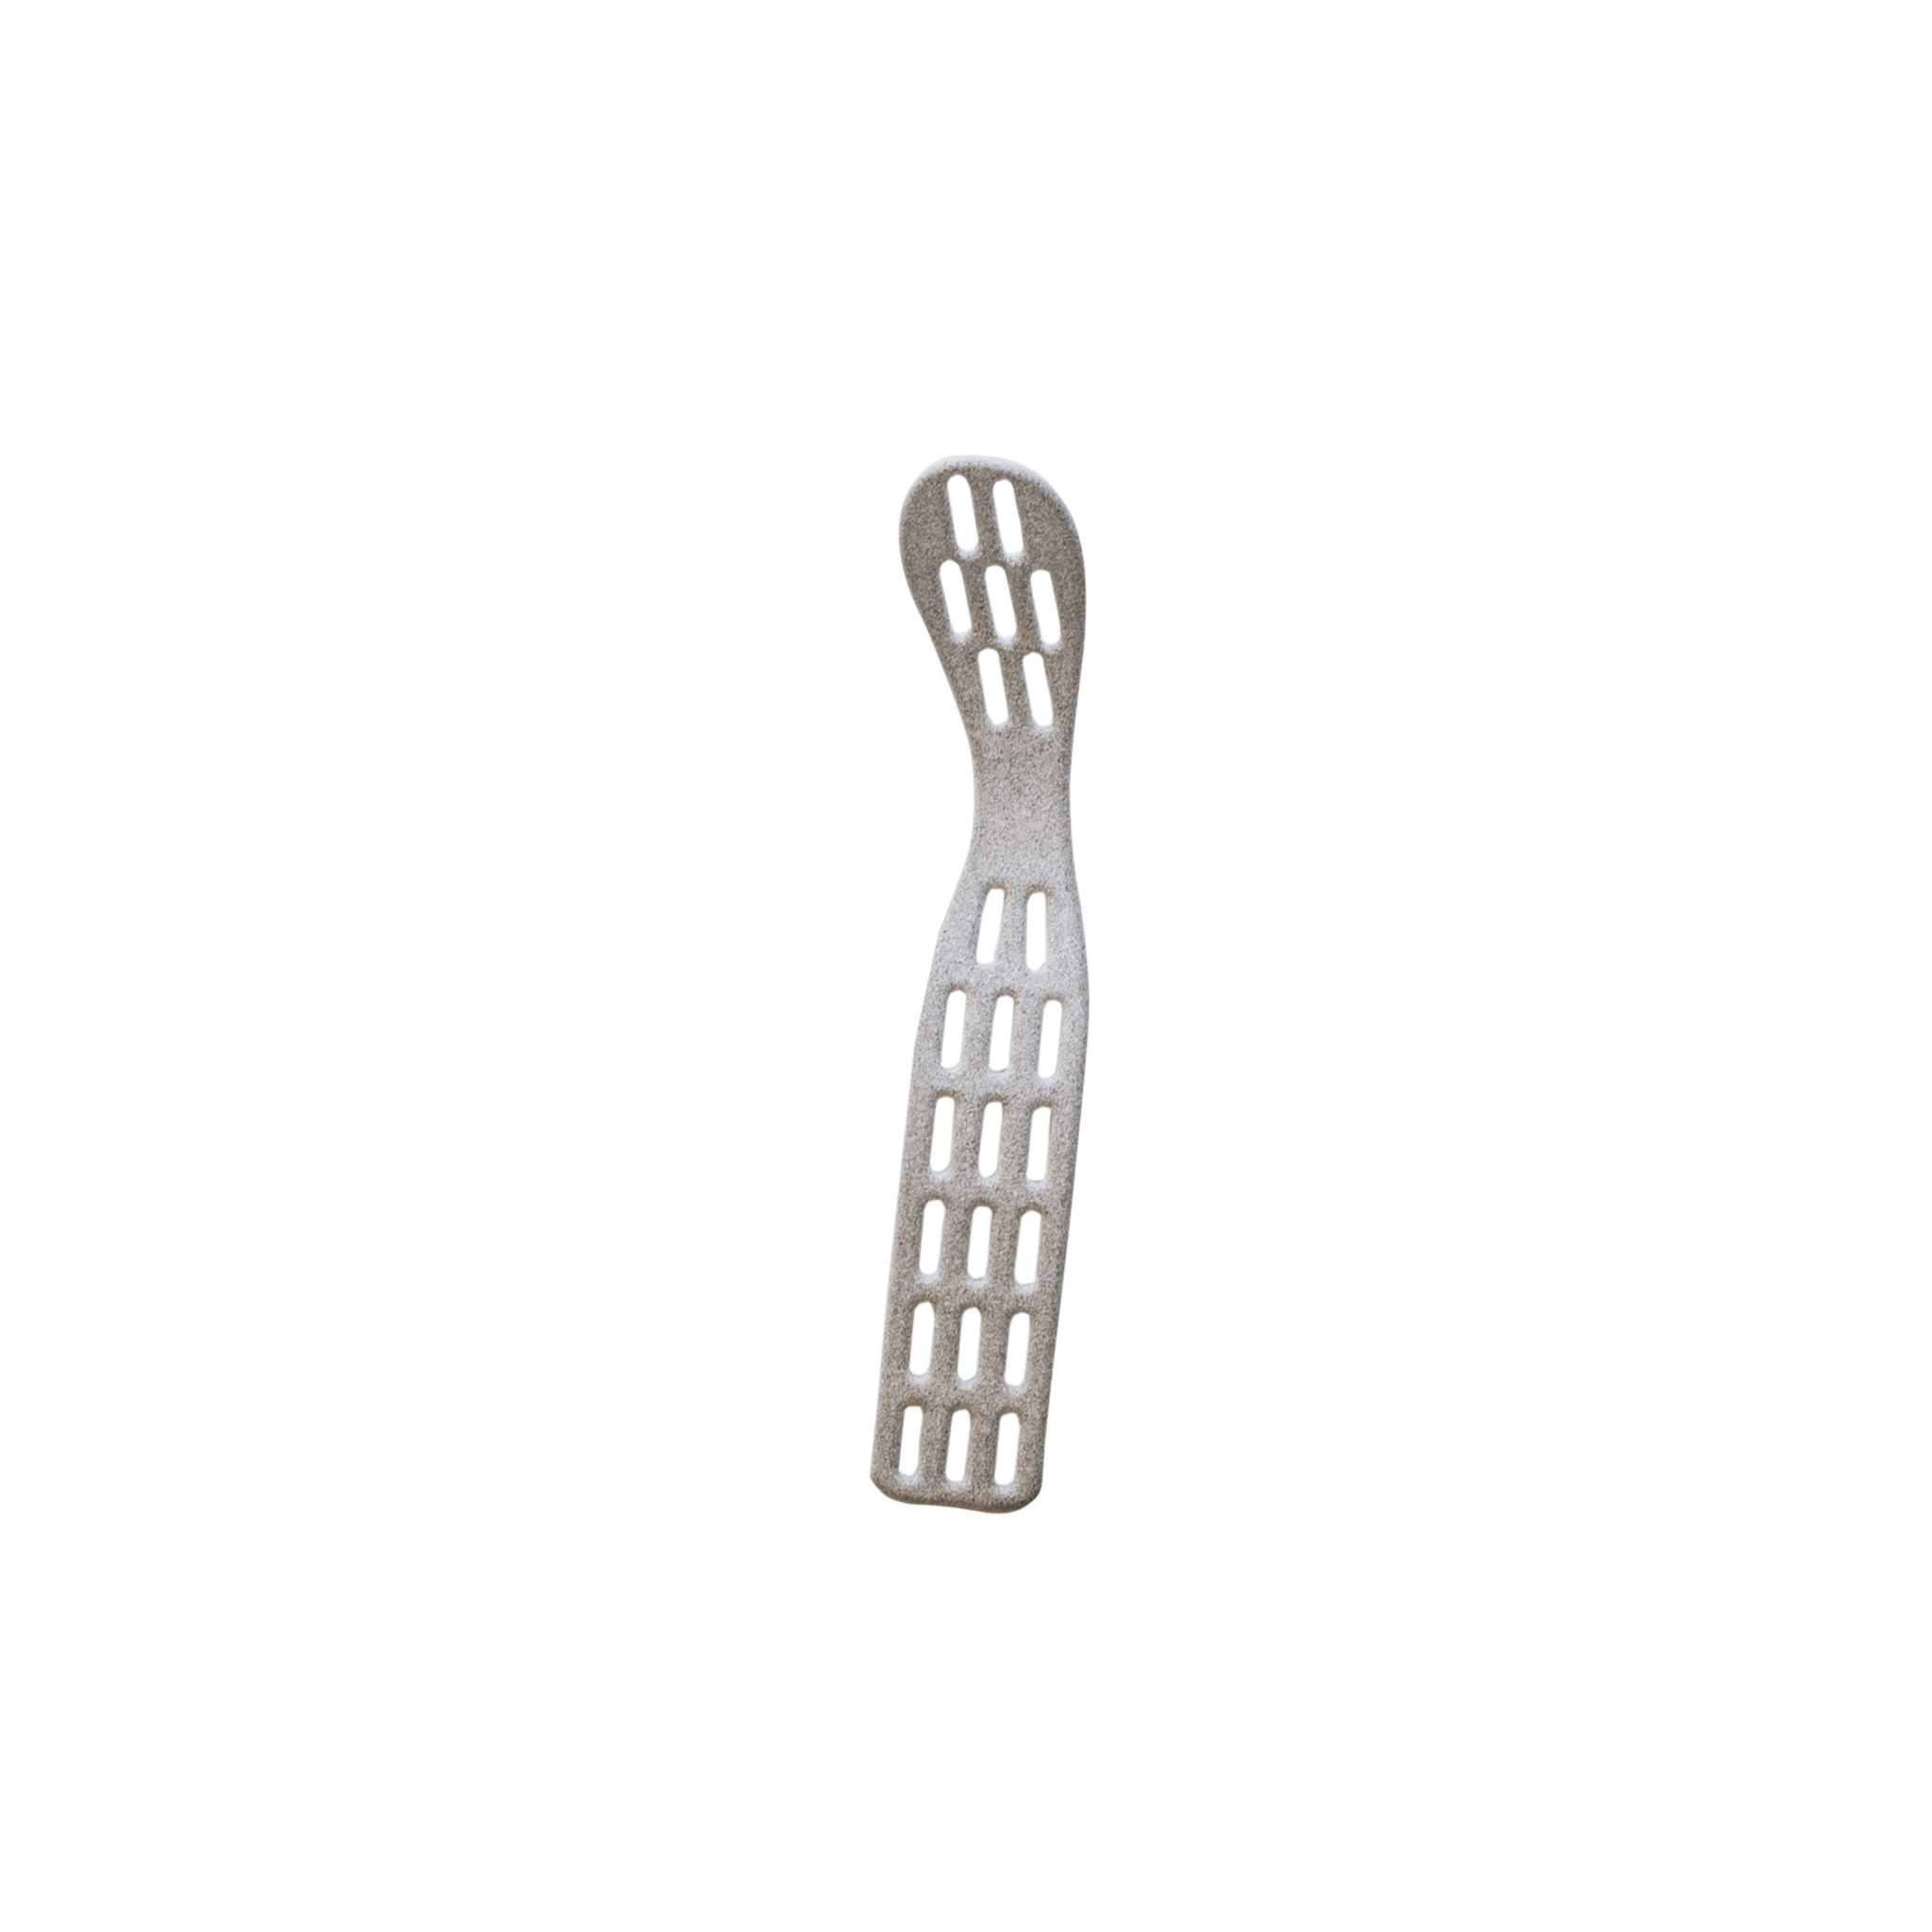 A gray perforated lightweight wrist splint ergonomically curved for women with carpal tunnel syndrome and arthritis. 